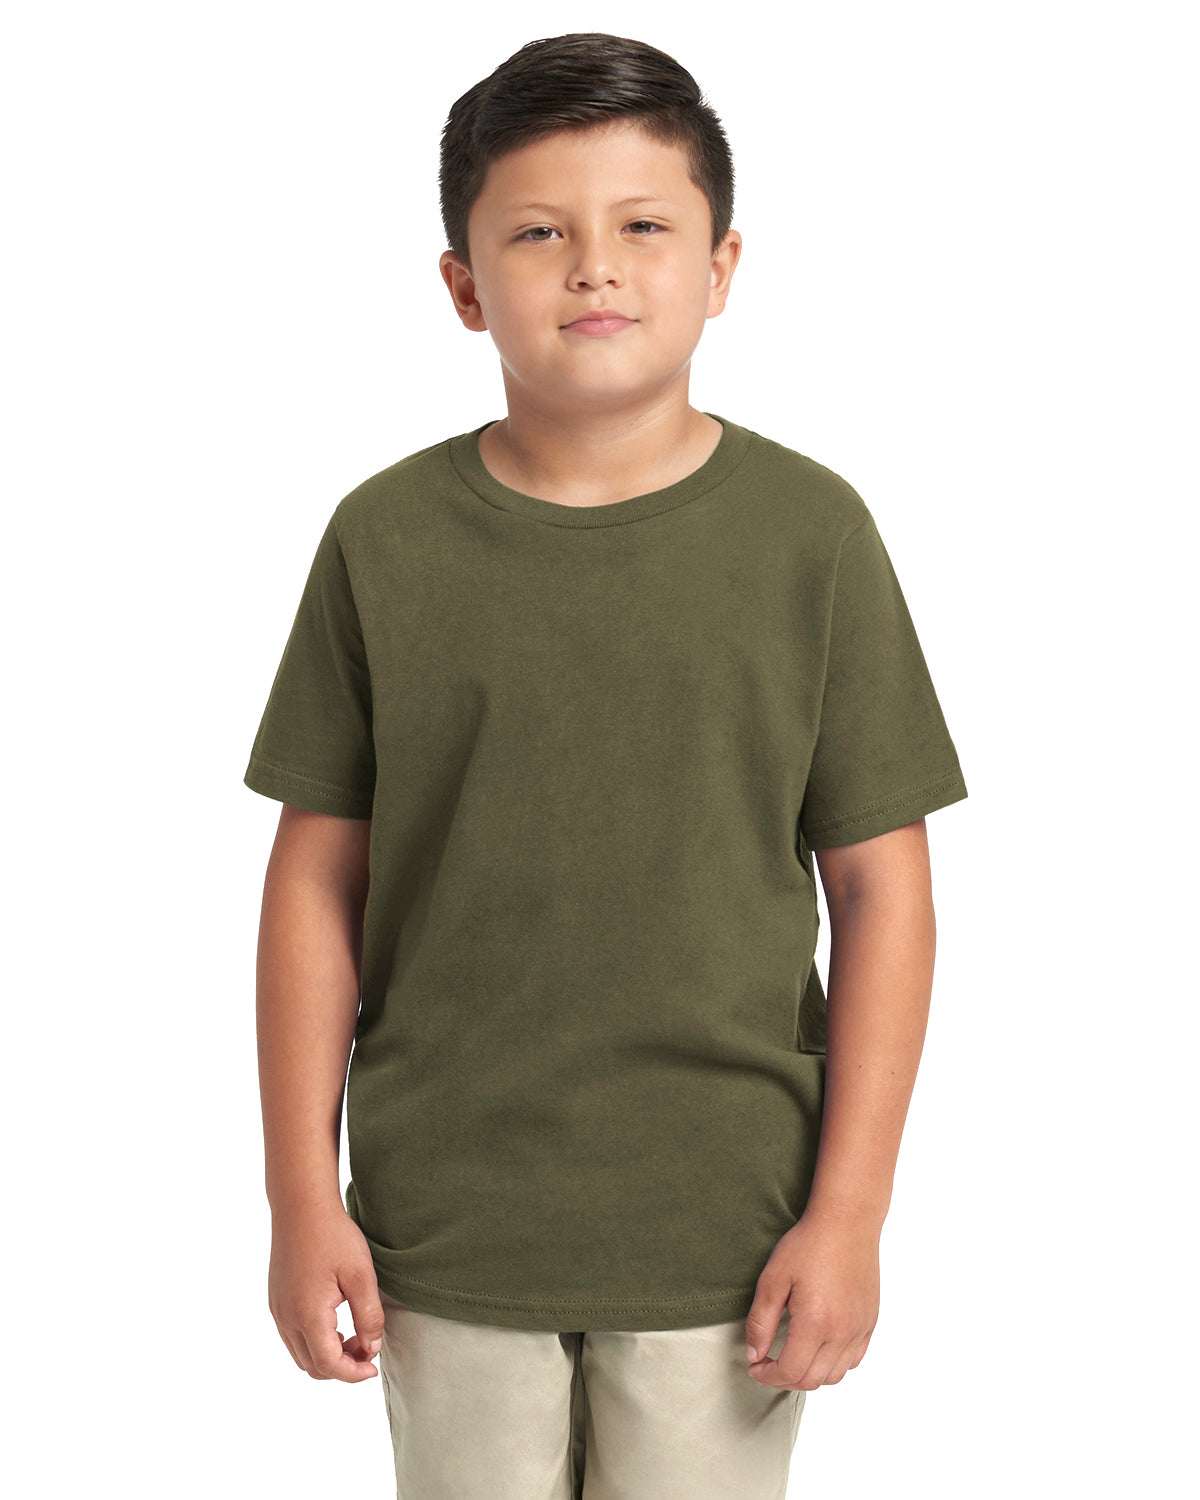 child model wearing next level youth tee in military green